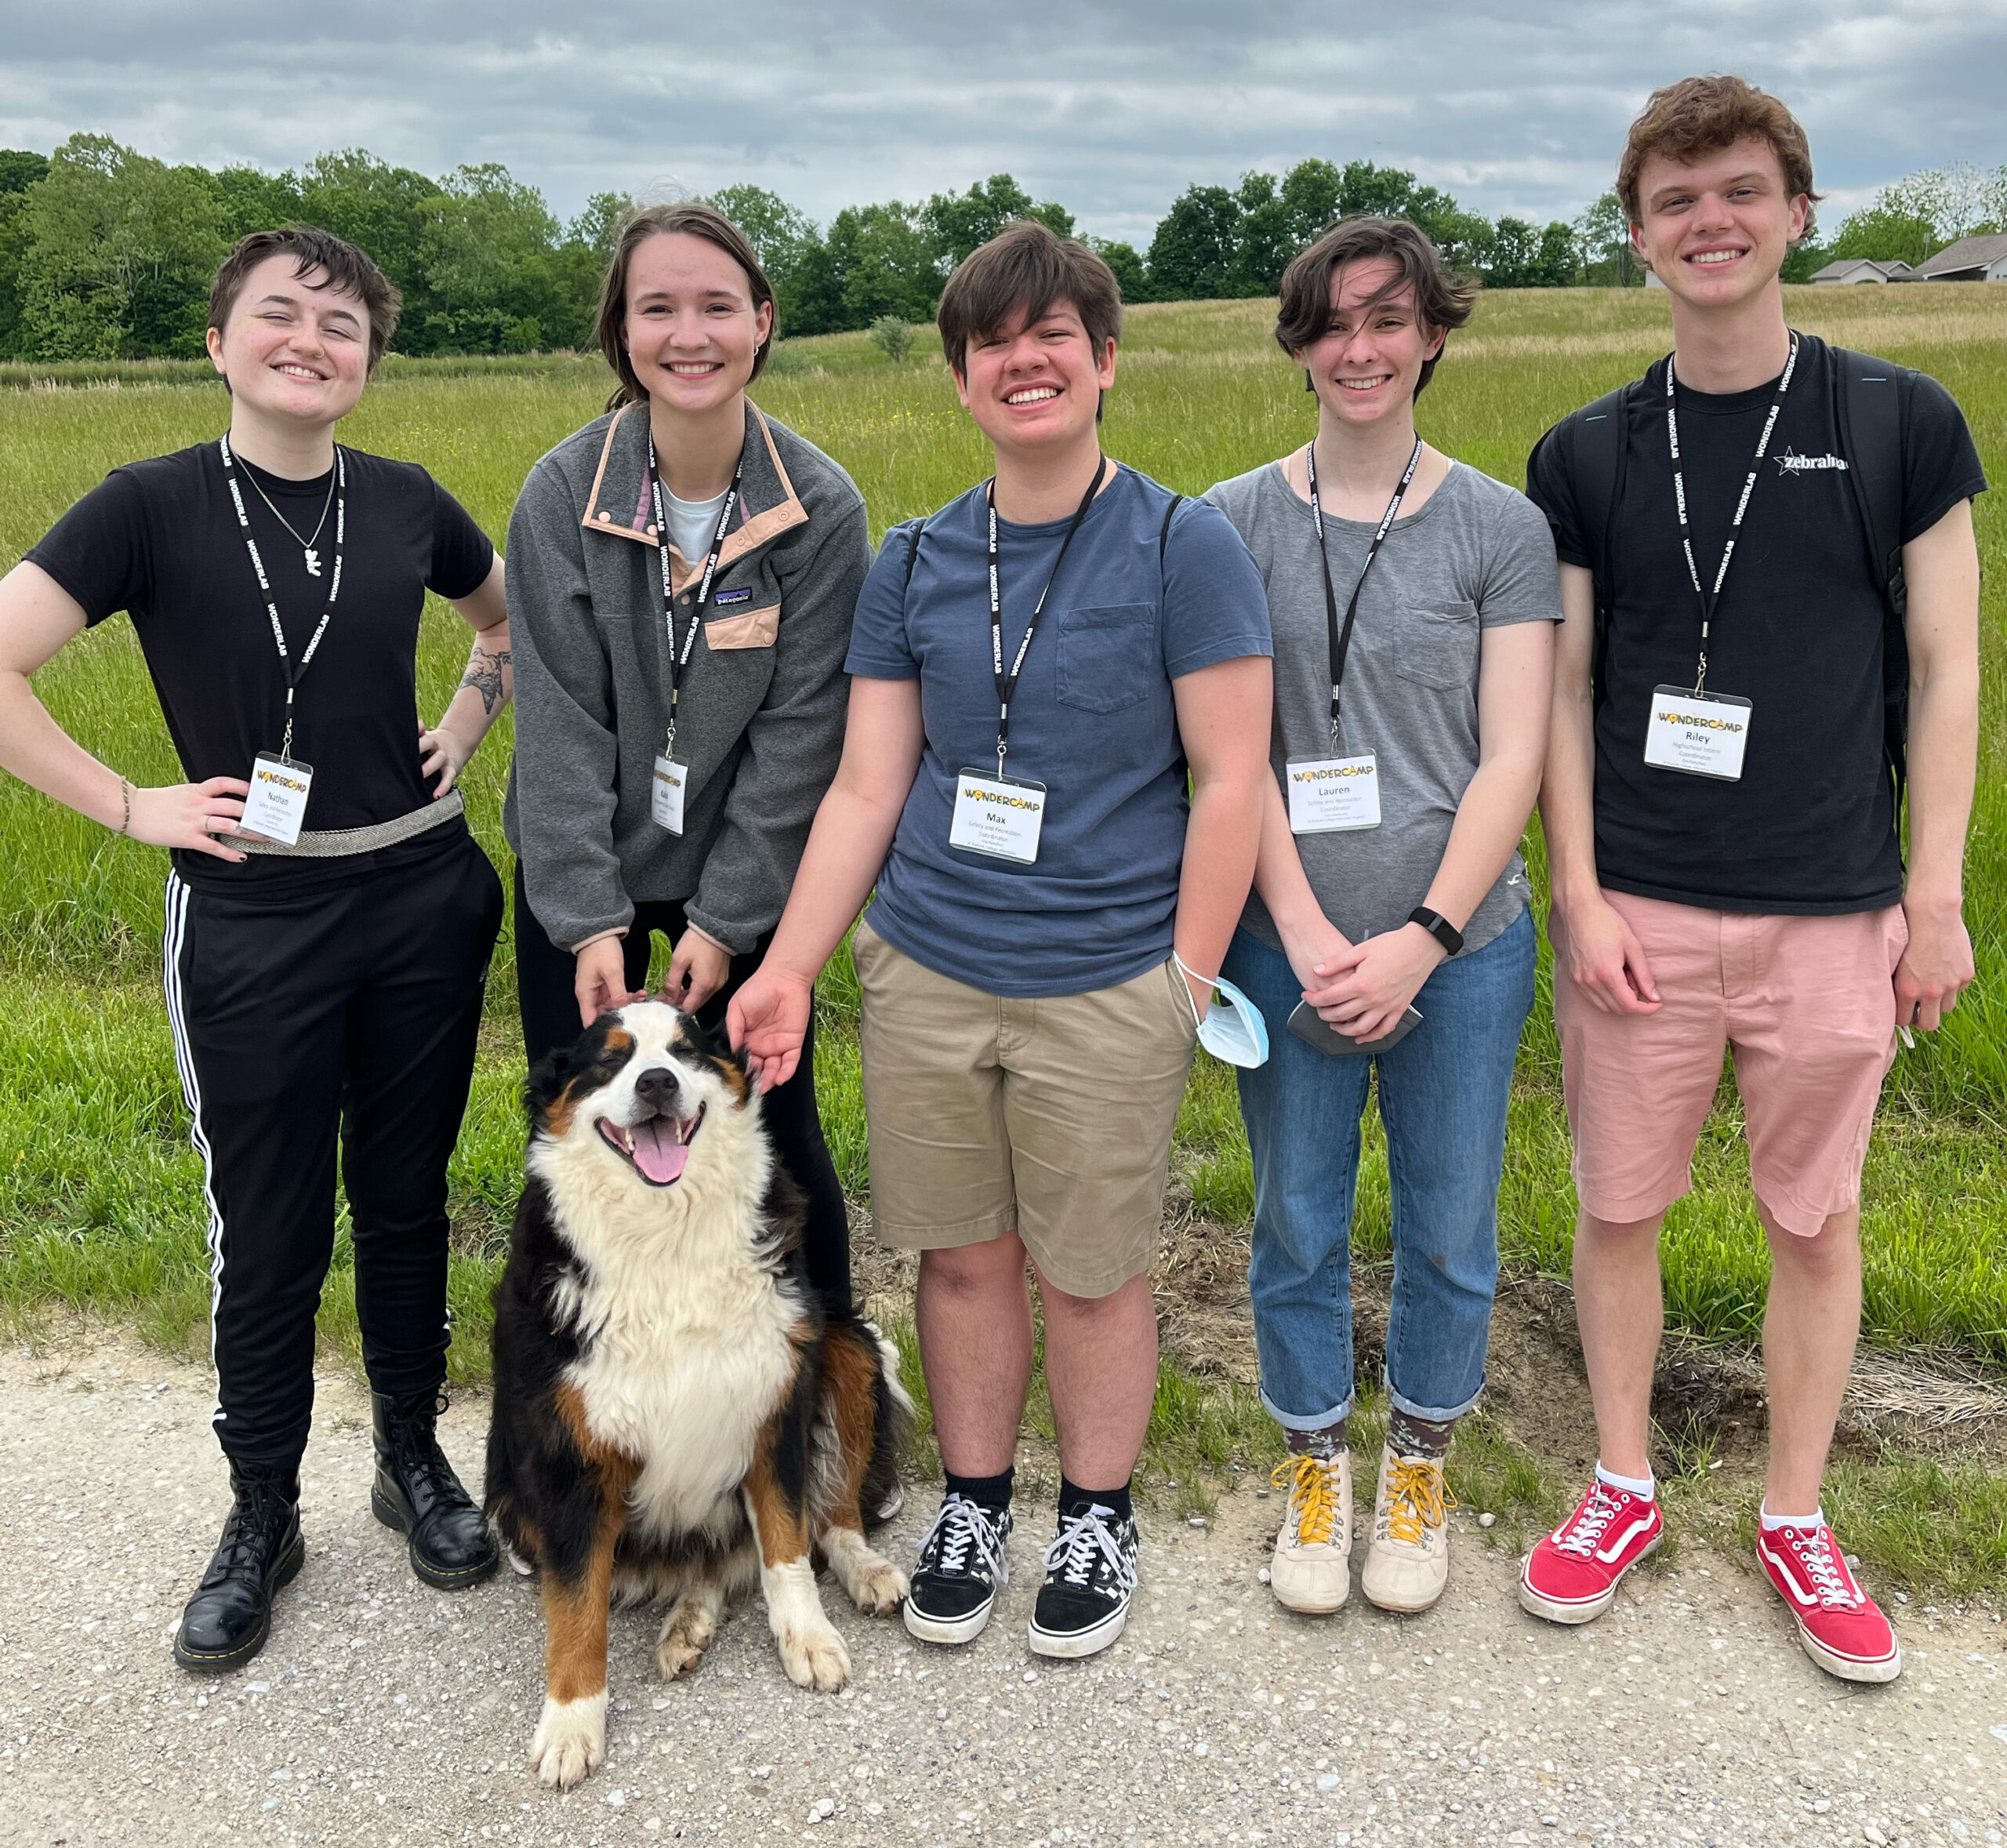 5 smiling Wonderlab interns stand with a dog outdoors